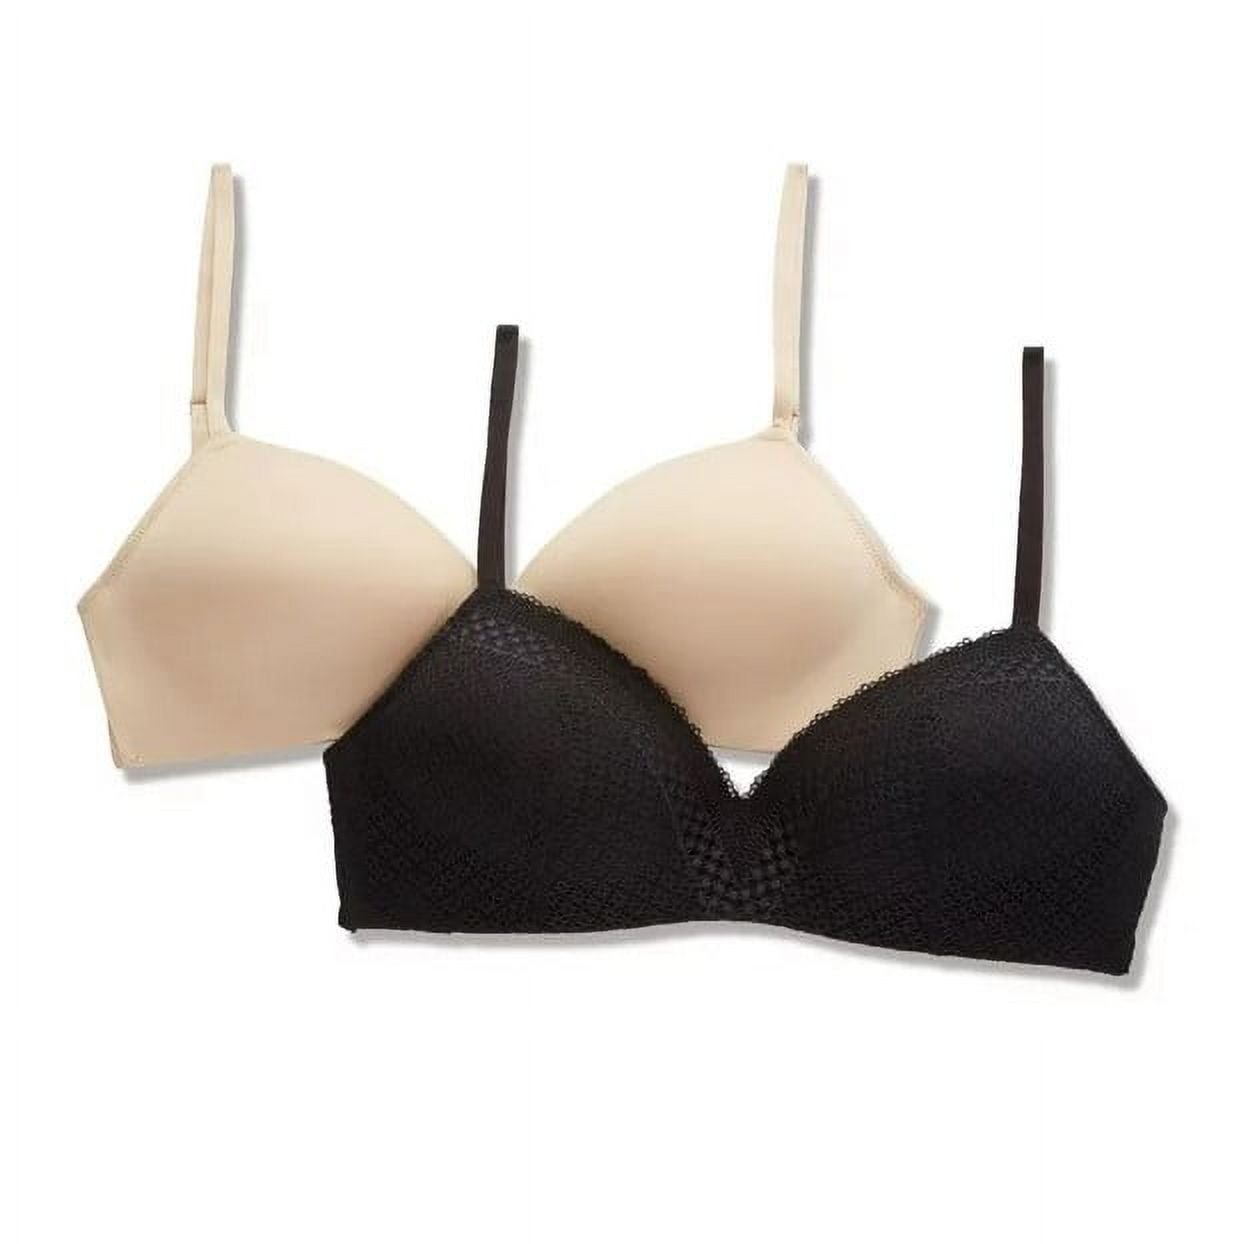 Maidenform Self Expressions Bra Women Size 36C Black Strapless Wireless -  $18 New With Tags - From Teresa